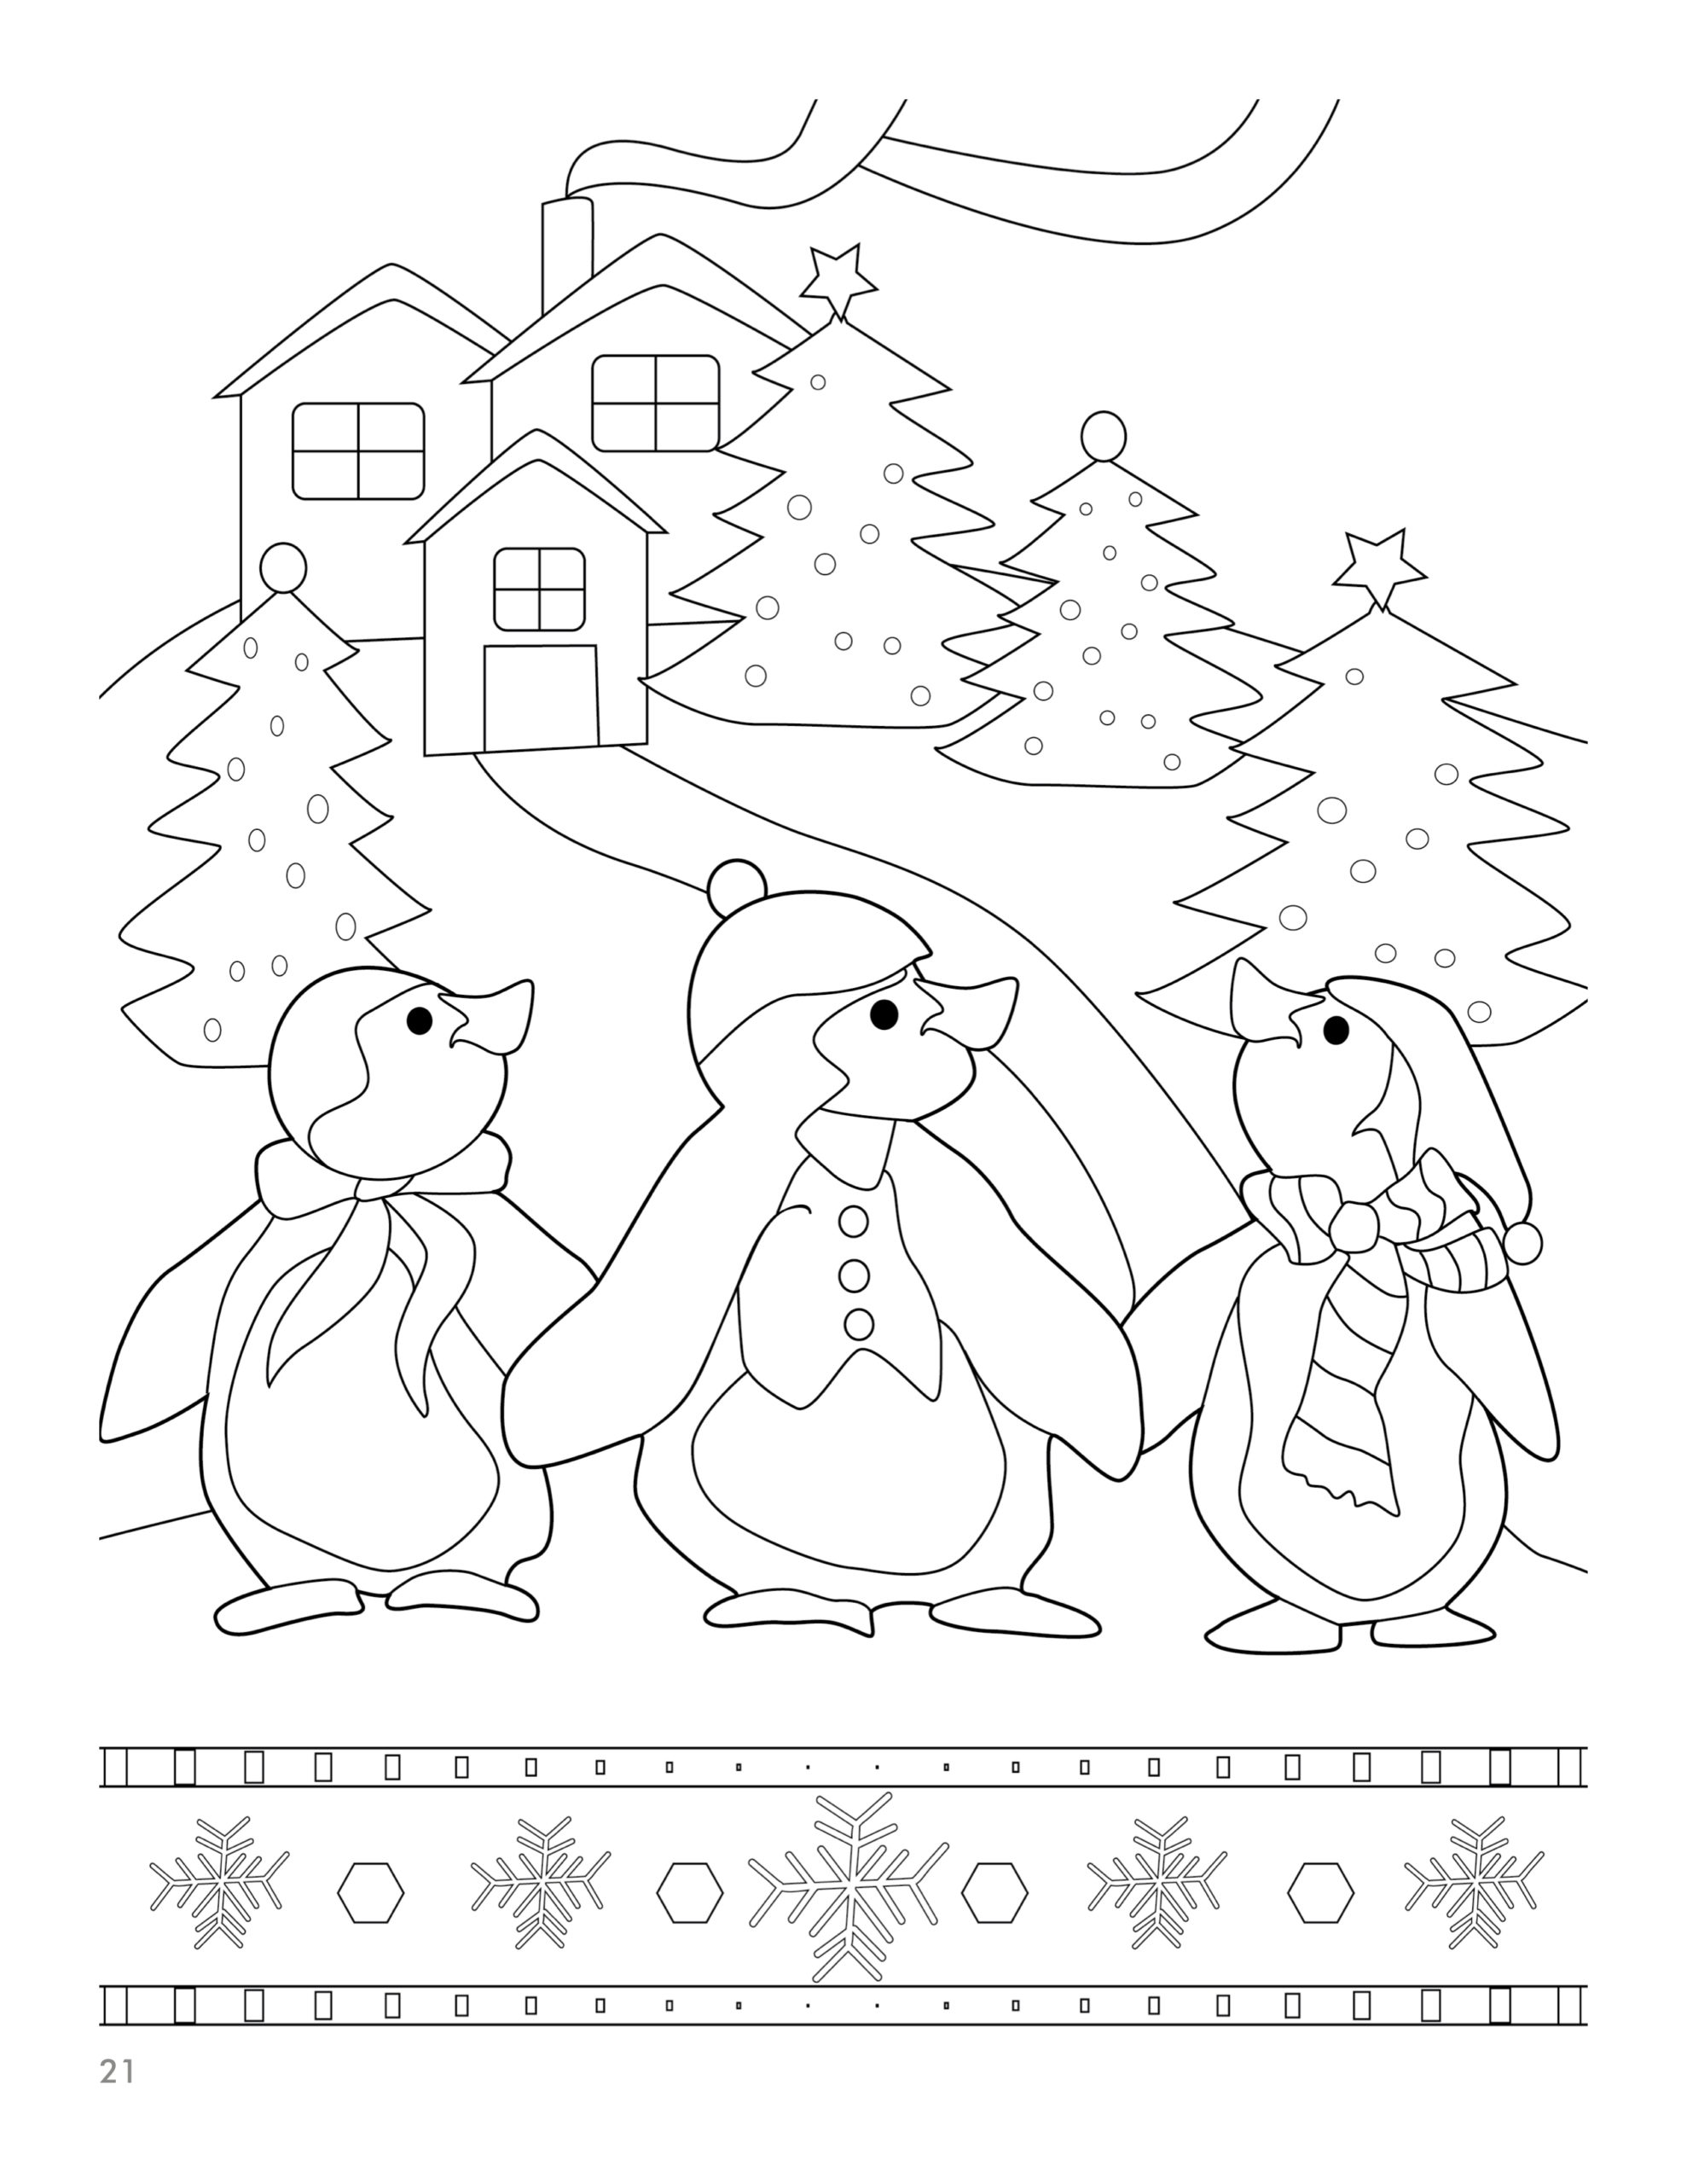 worksheet ~ Worksheet Incredible Addition Coloring Pages Christmas Sweater  Book Maroon Comprehension Worksheets For Grade Sheets Year Paragraph  Exercises Easy Division Creative Incredible Addition Coloring Pages.  Christmas Color By Addition Coloring Pa